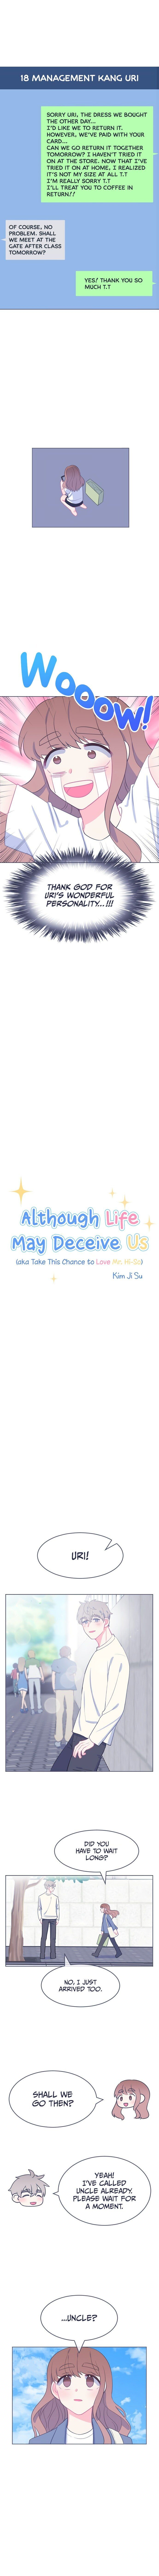 Although Life May Deceive Us - Page 1